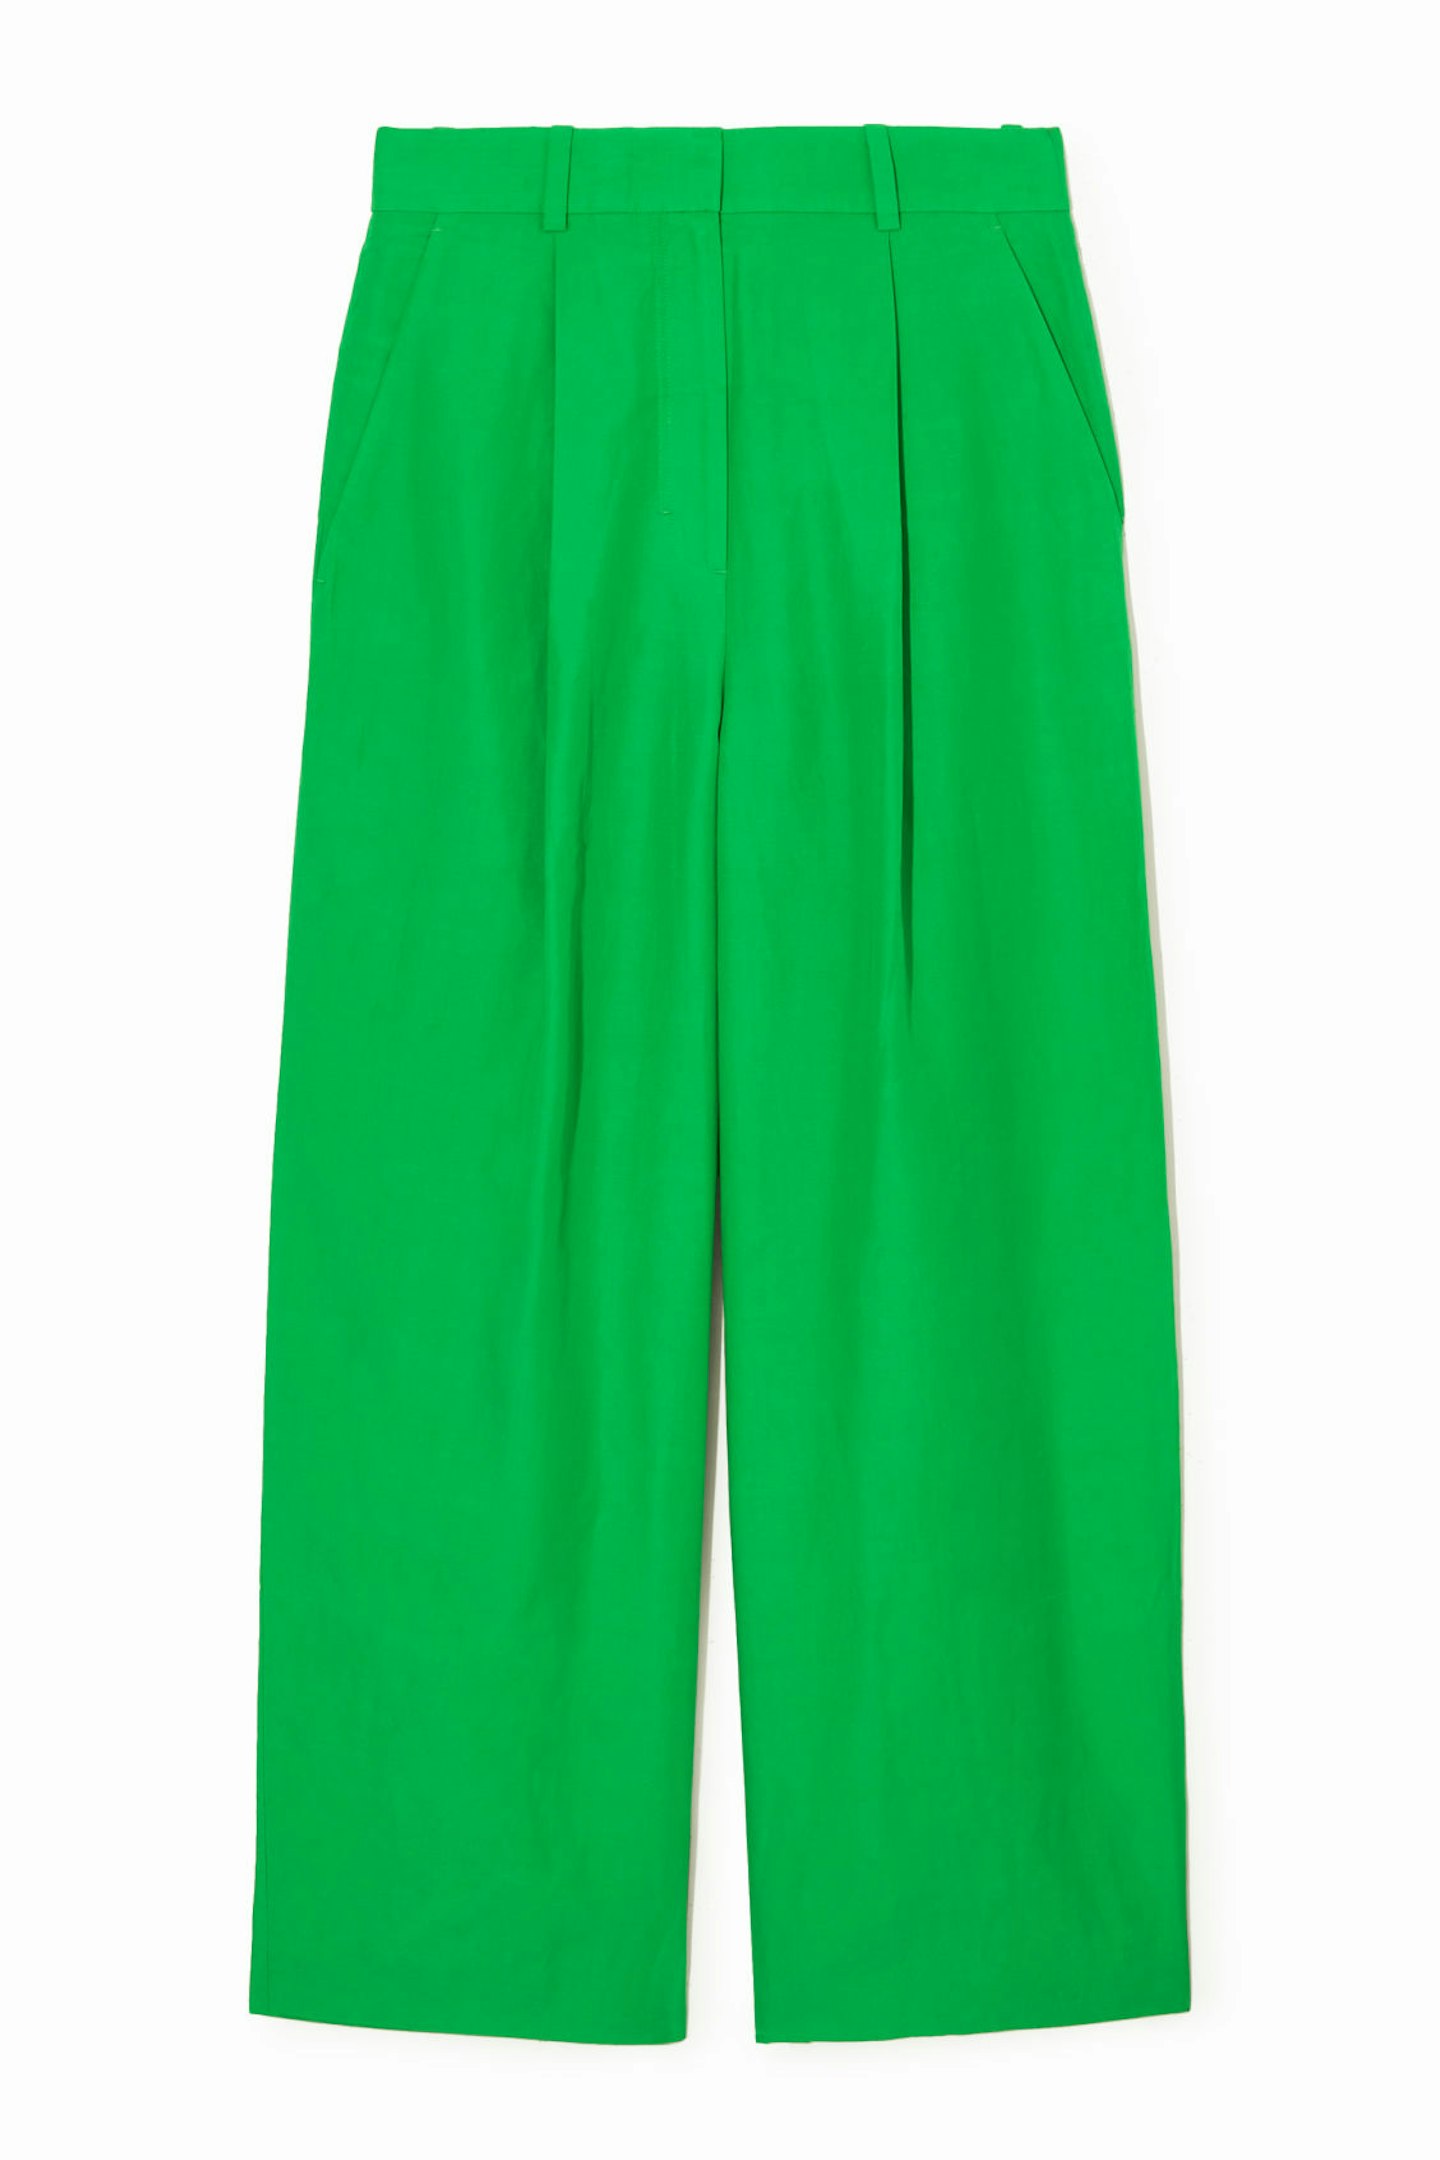 COS, Green Trousers